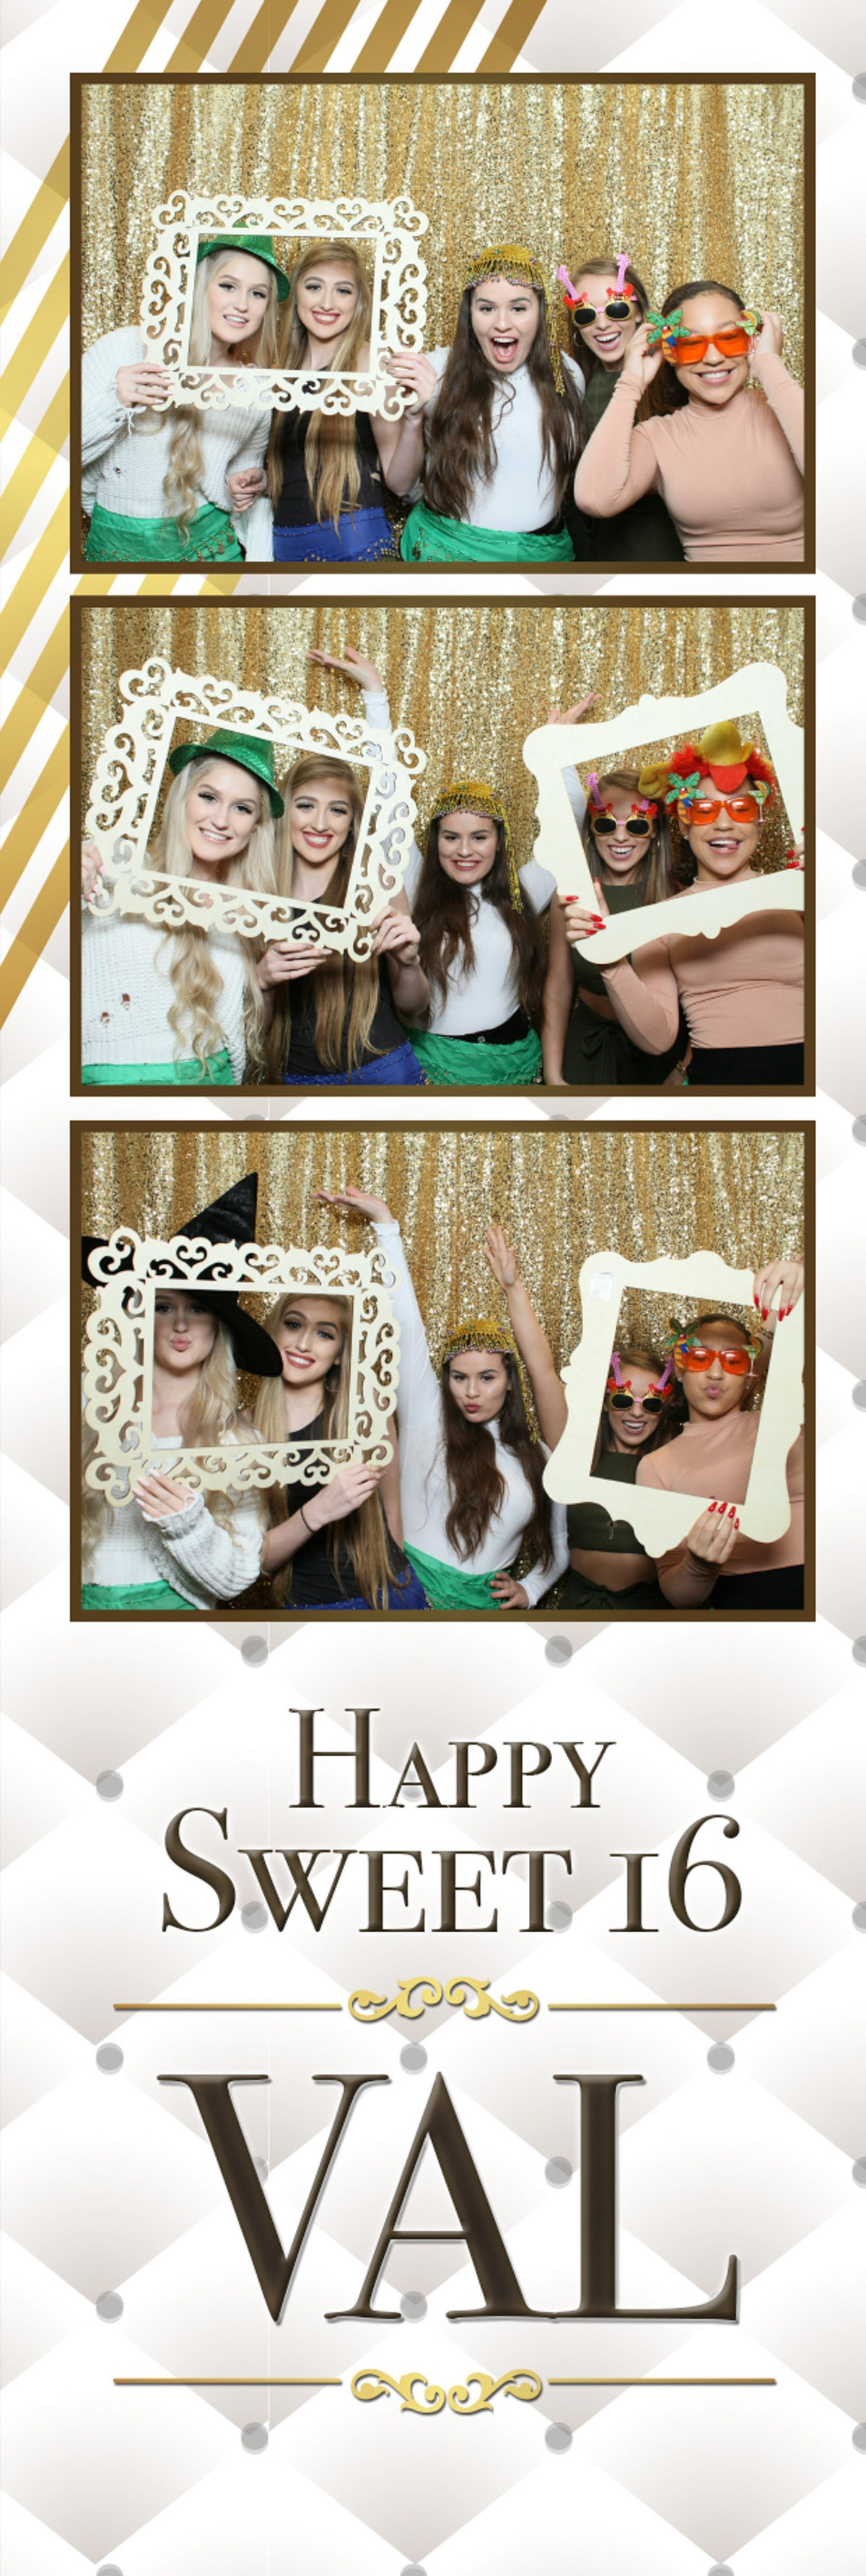 Photo booth rental for Val Worthington's sweet 16 party in Mobile, Alabama.